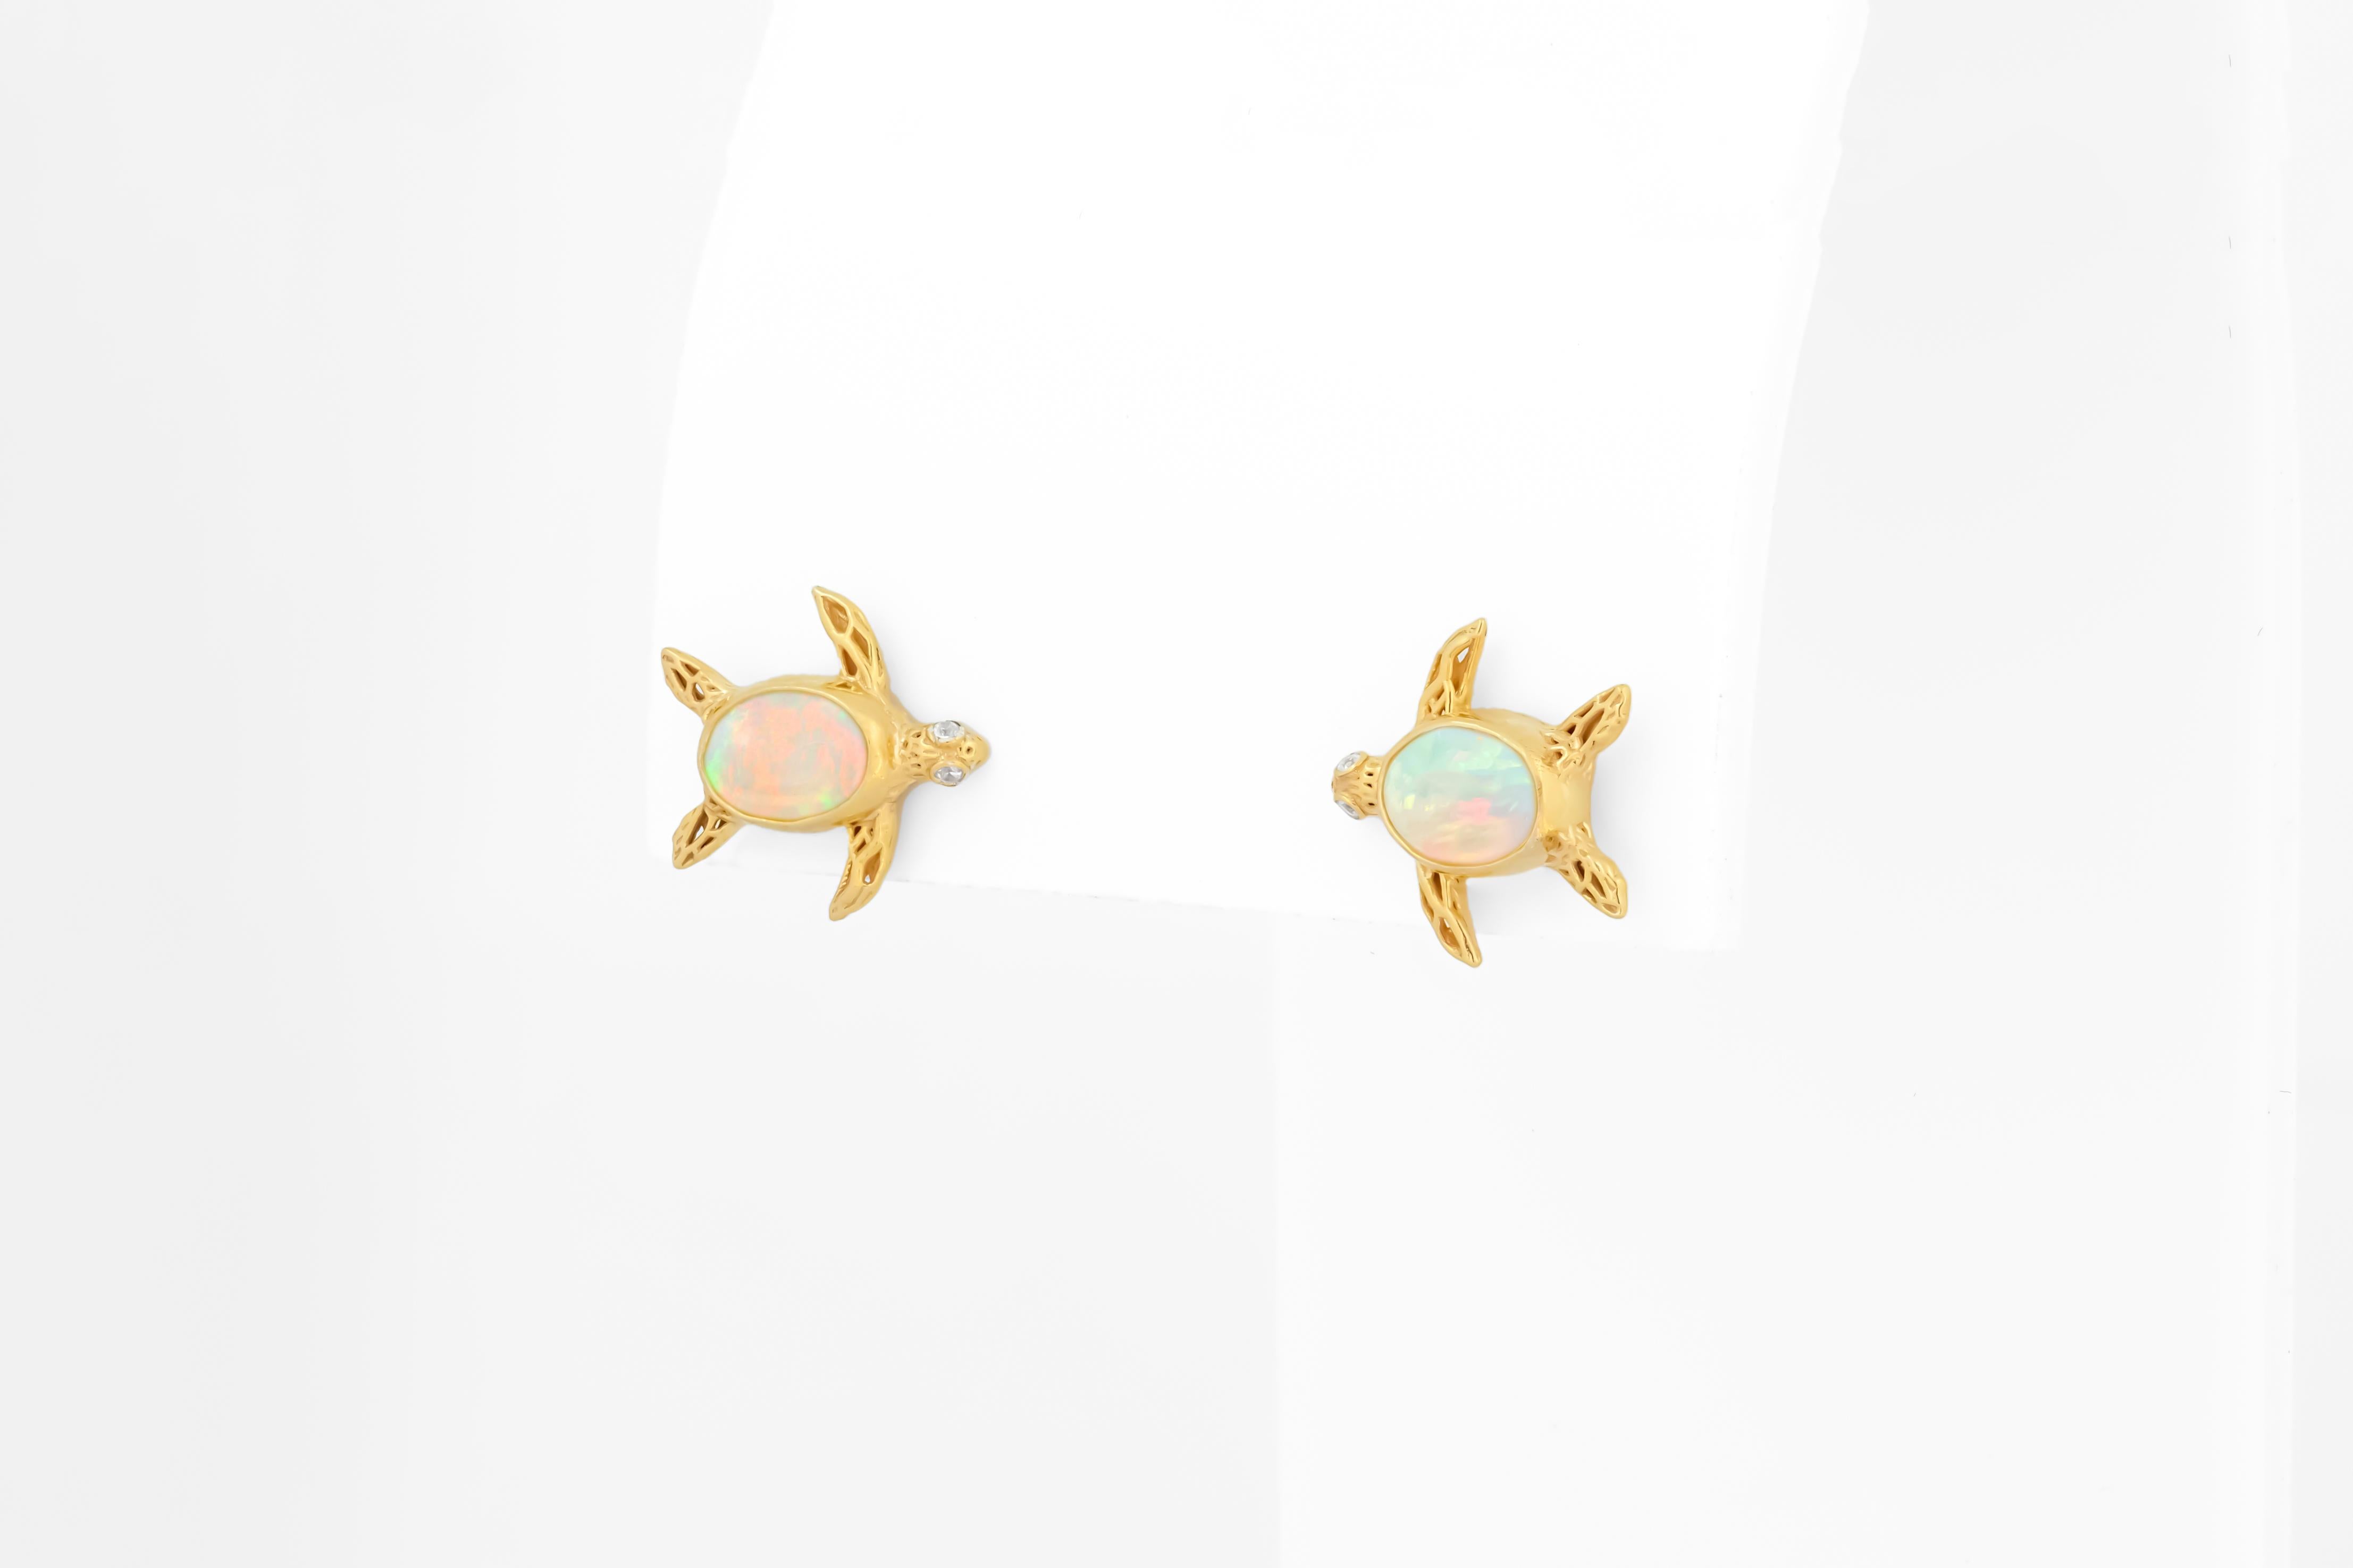 Turtle earrings studs with opals in 14k gold. 2